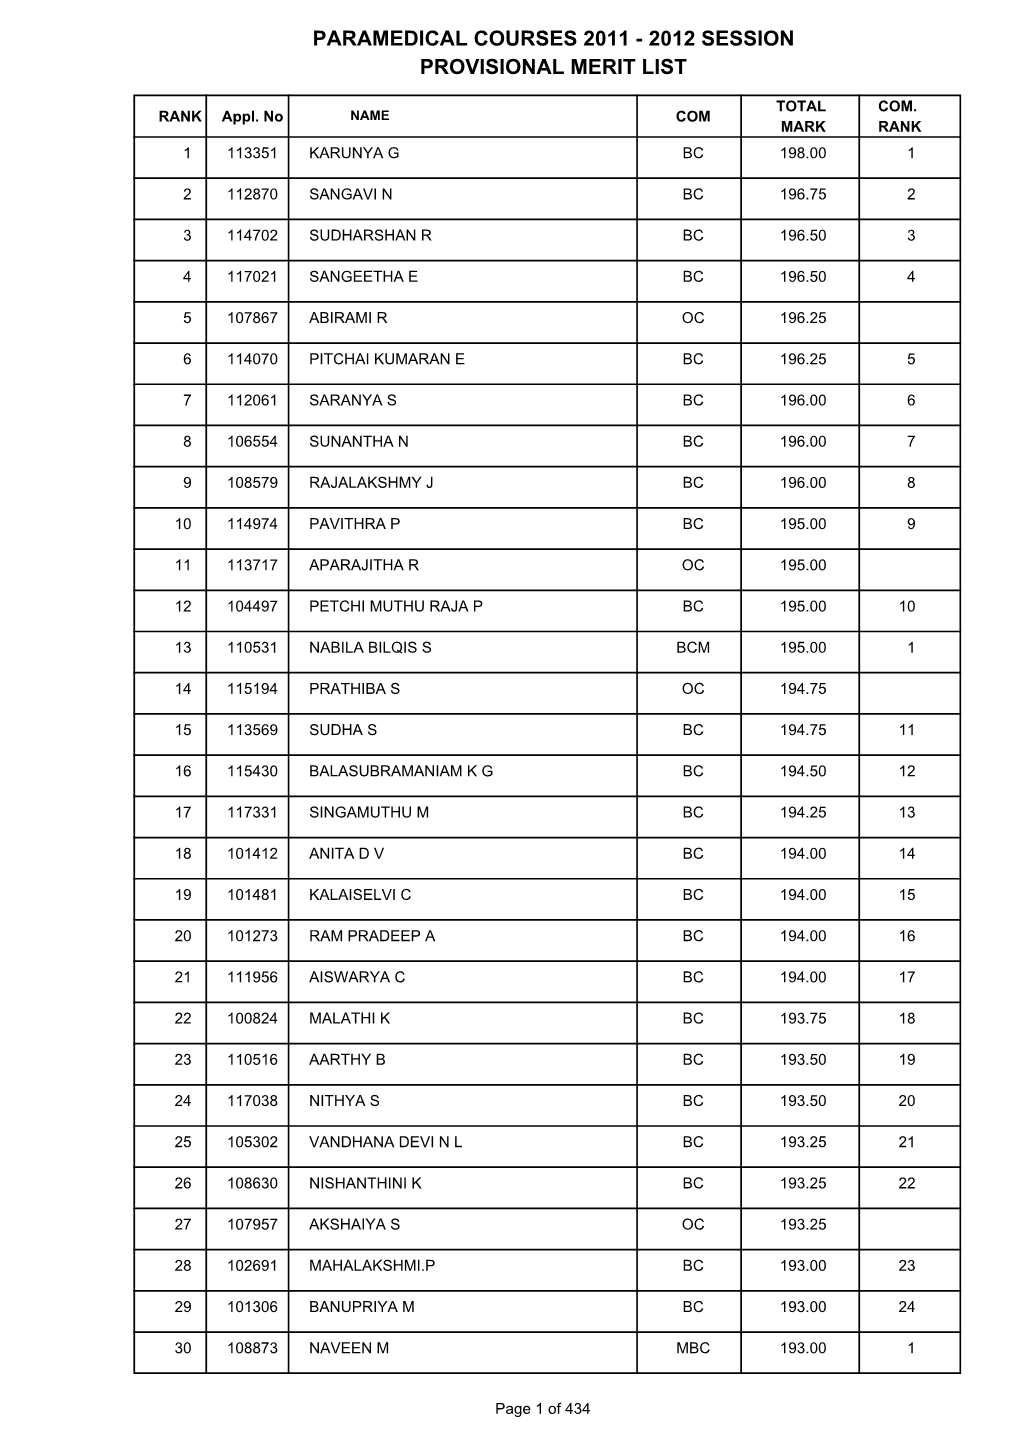 Paramedical Courses 2011 - 2012 Session Provisional Merit List